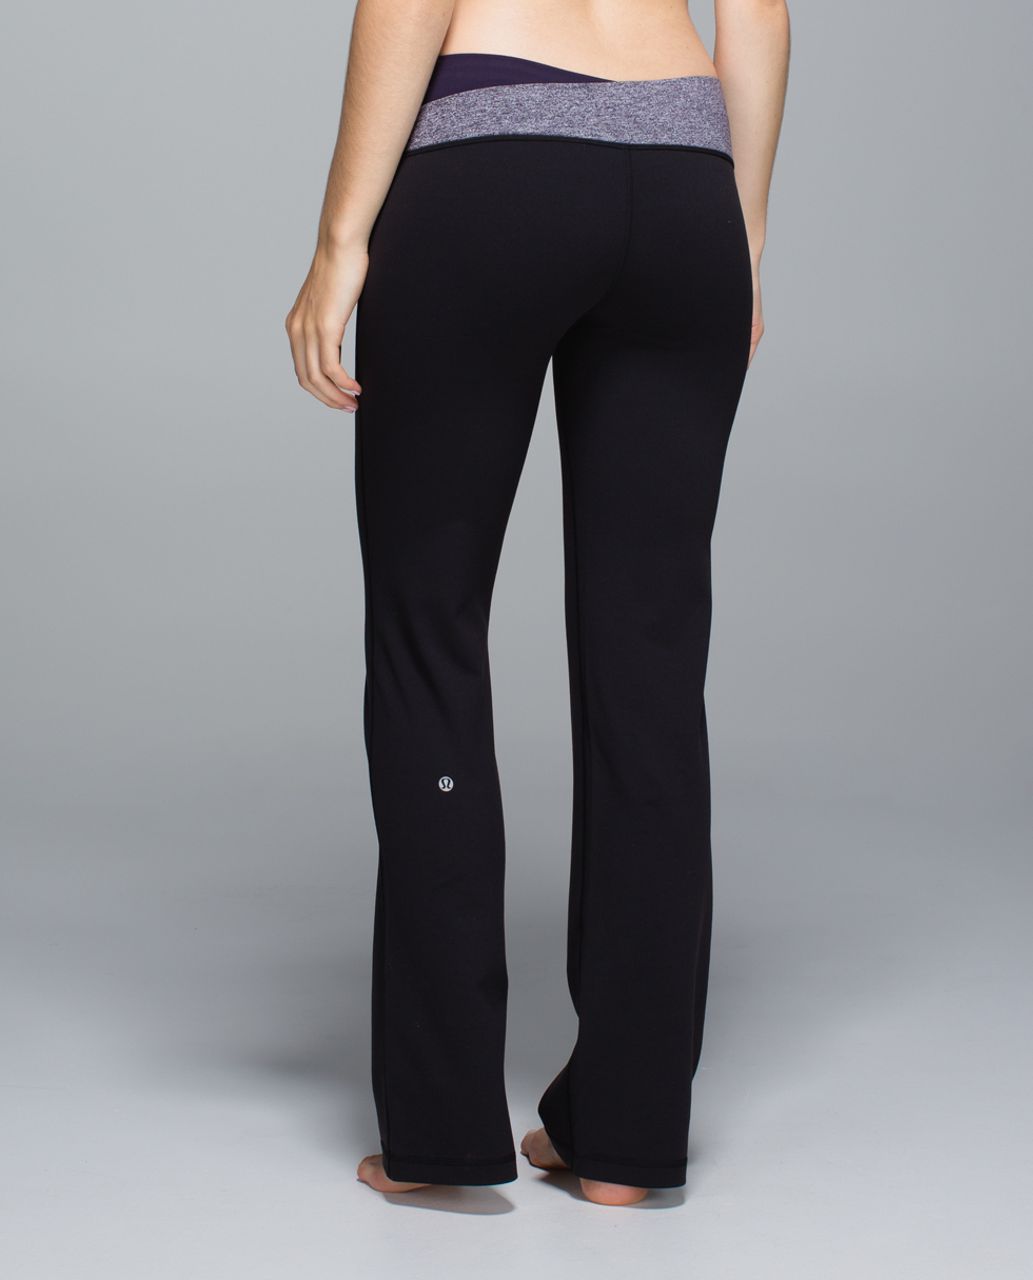 lululemon Astro Pant in Dazzling Ultra Violet. Astro Pant Discontinued 